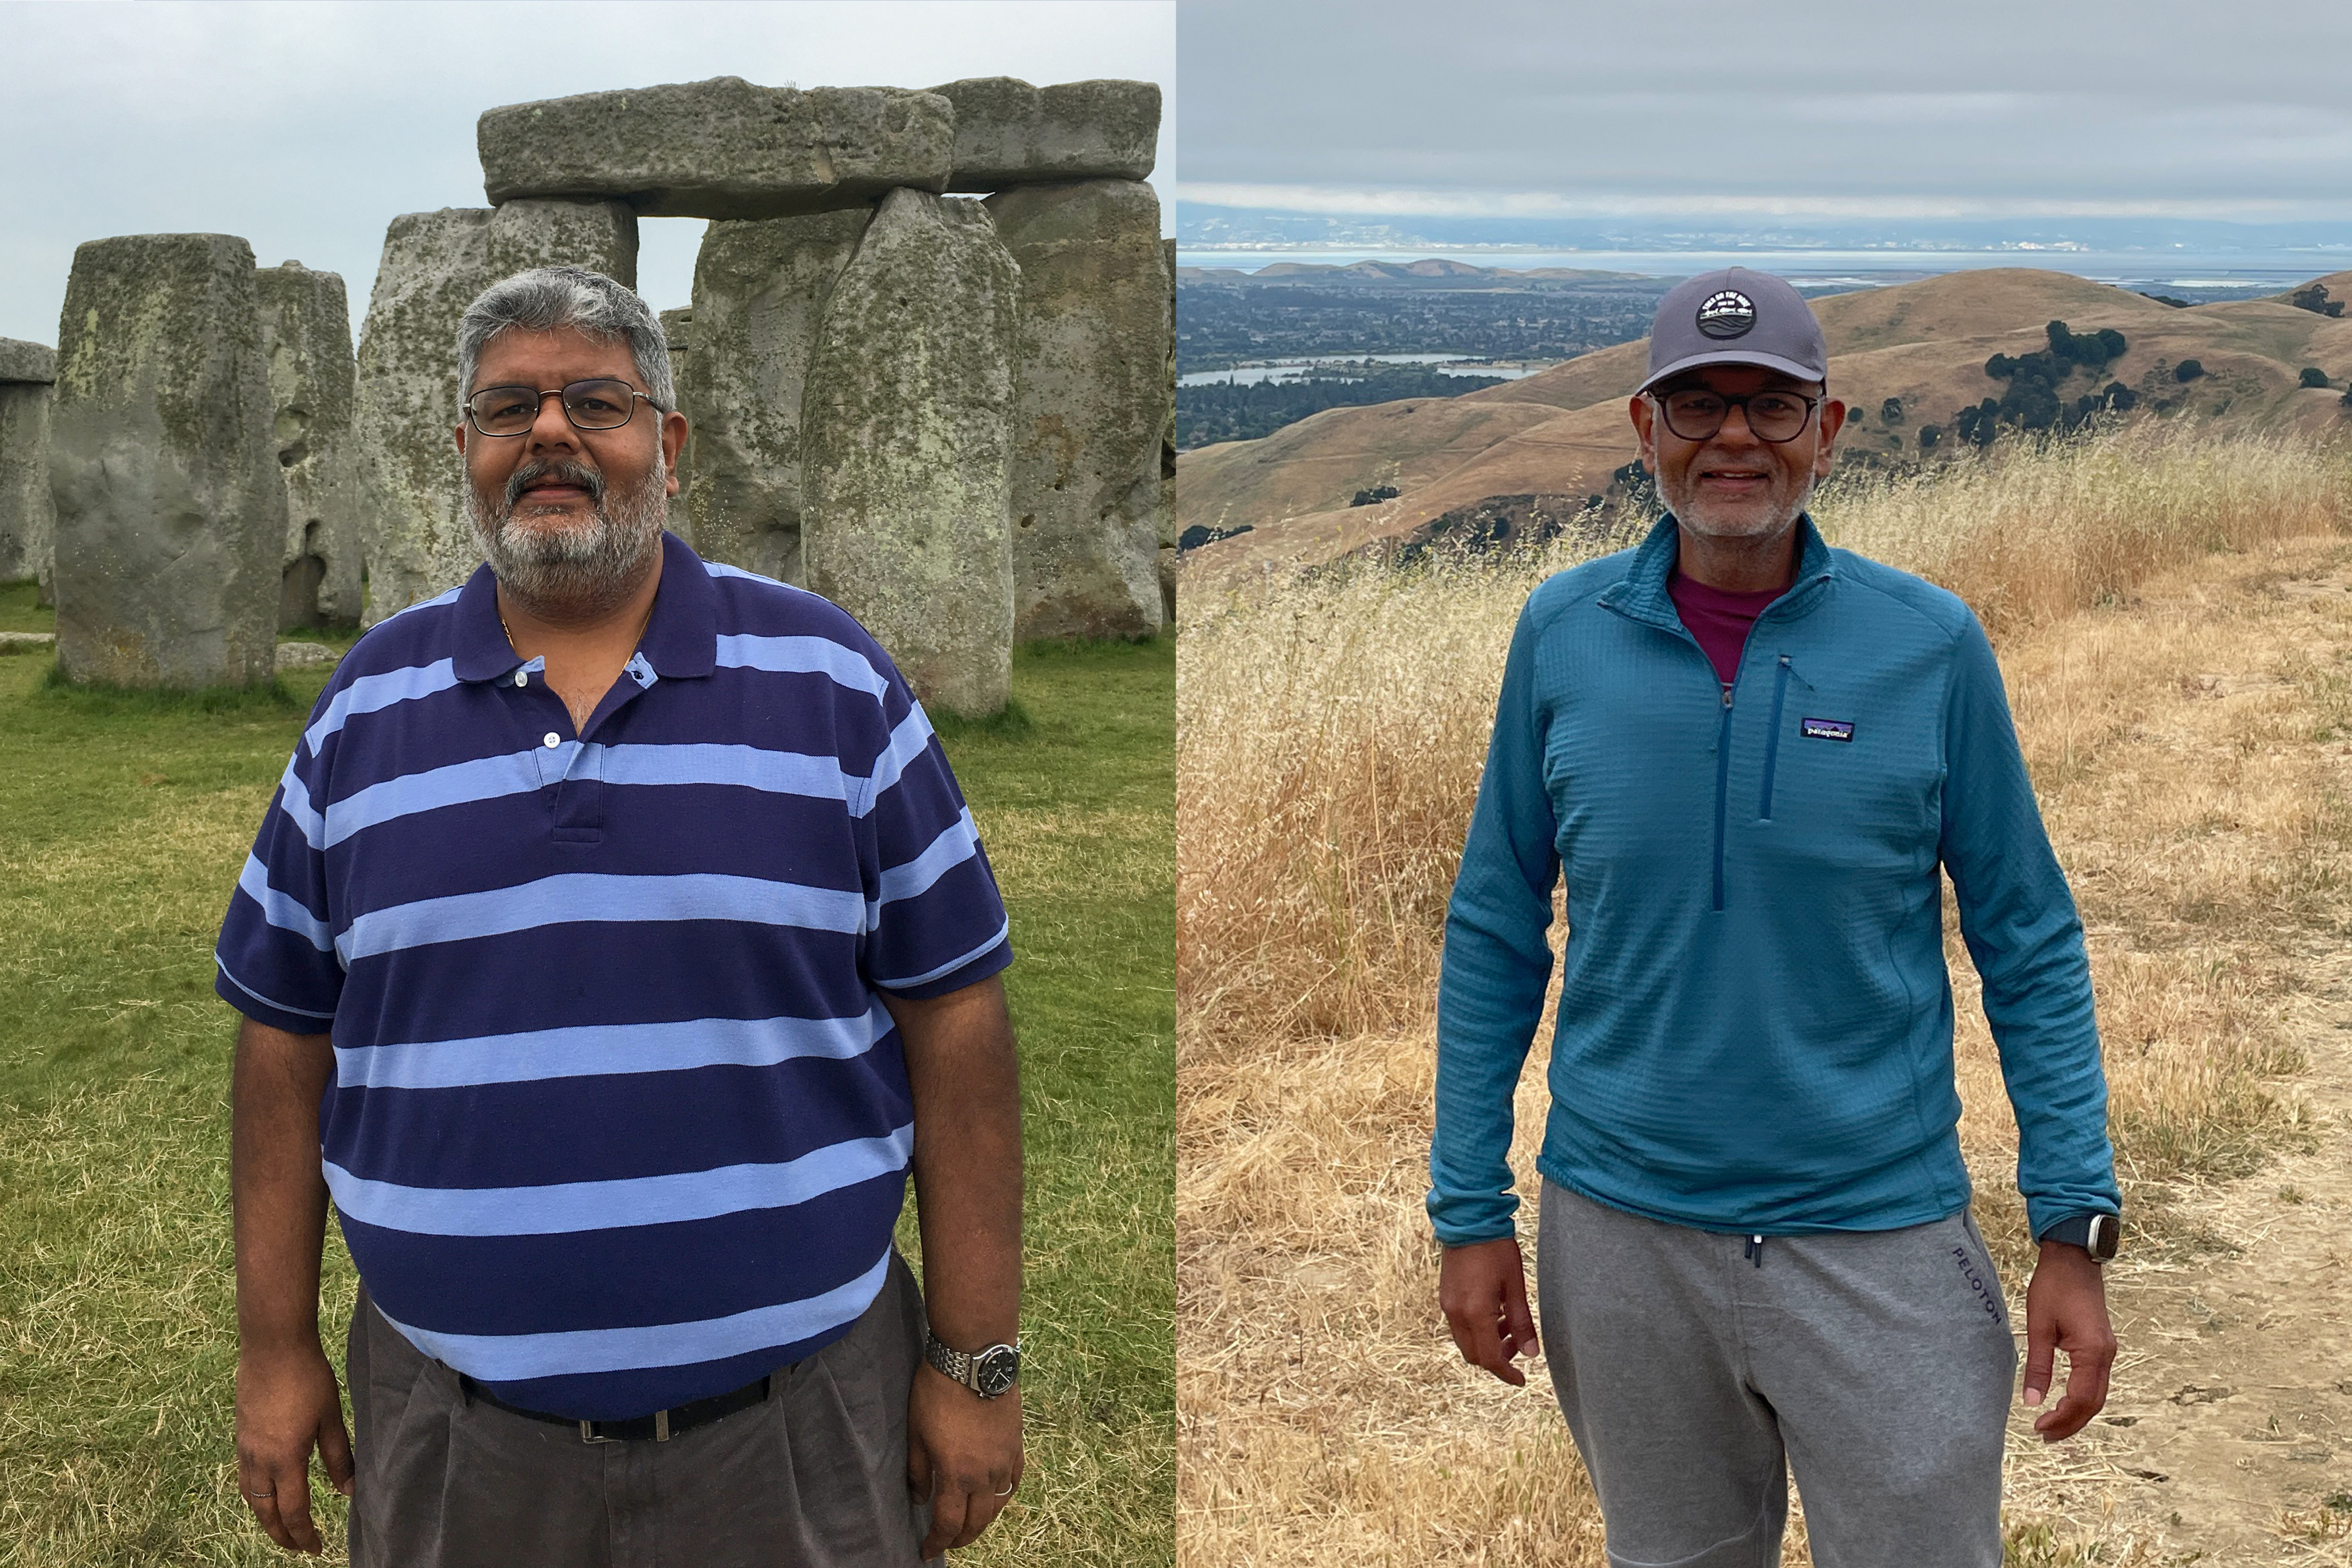 Dhruv Agarwala before and after losing nearly half his body weight in two years. The Indian tech entrepreneur used exercise and lifestyle changes, not weight-loss drugs to shed the kilograms after a health scare. Photo: Dhruv Agarwala